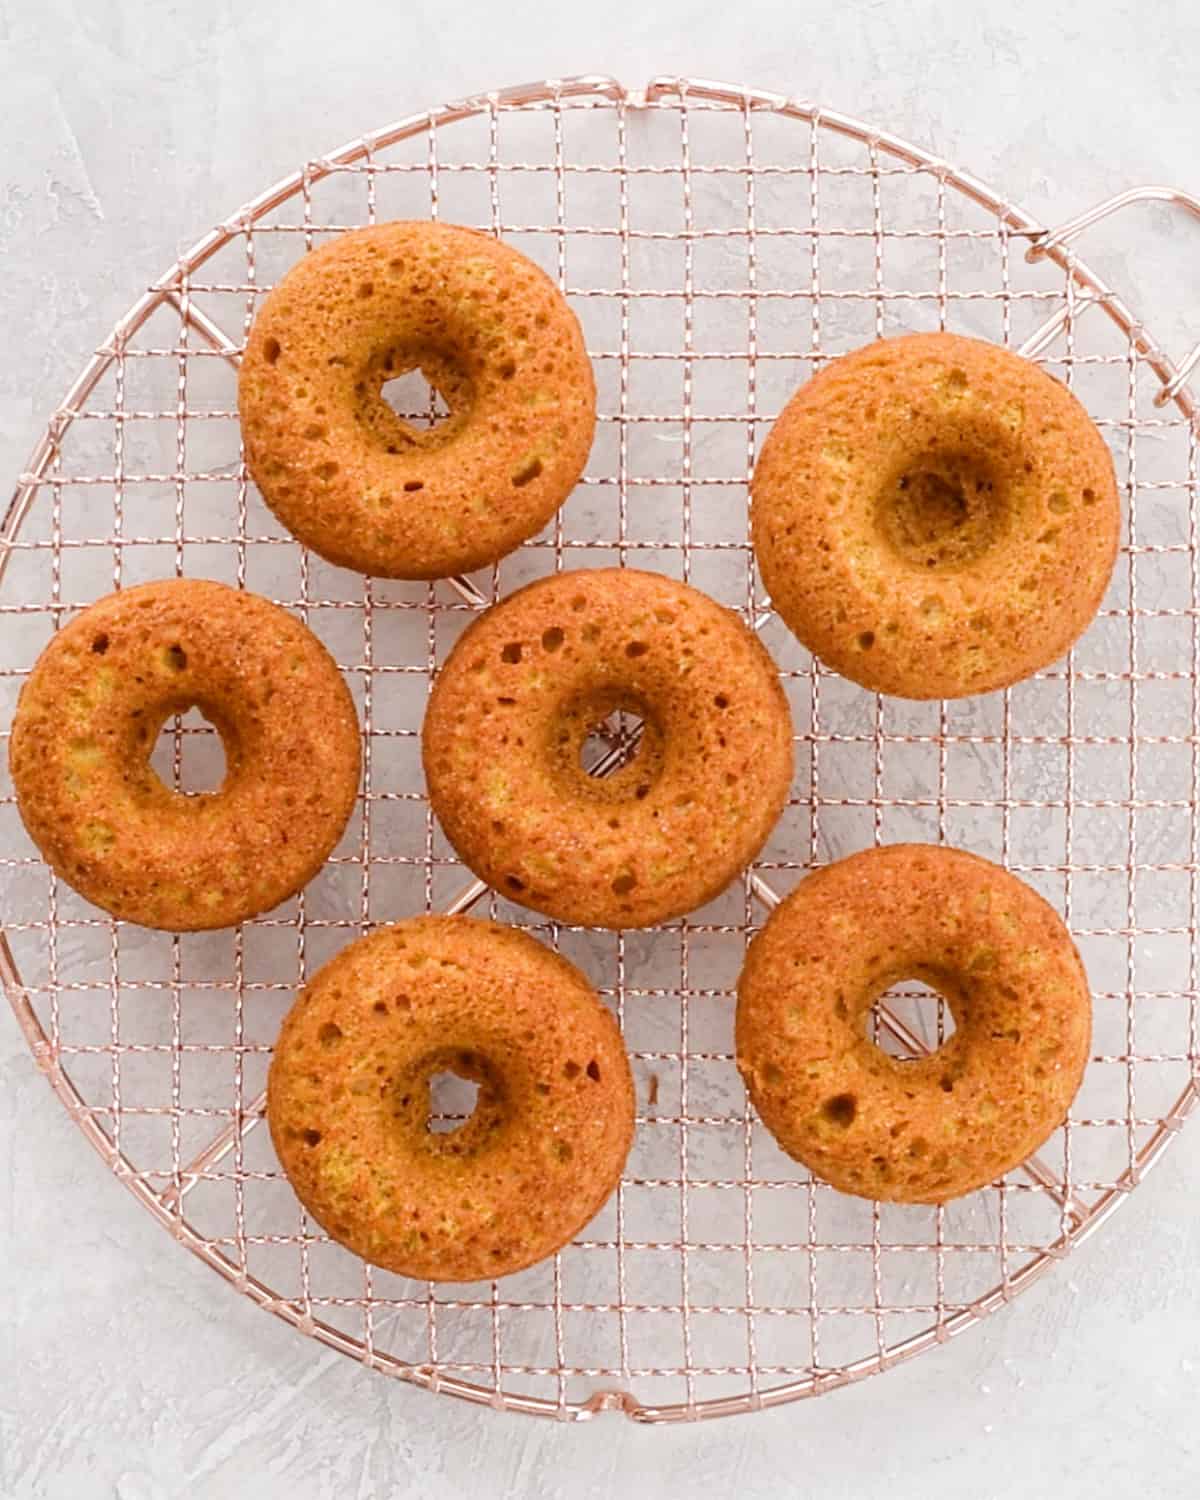 Baked Pumpkin Donuts on a wire cooling rack
